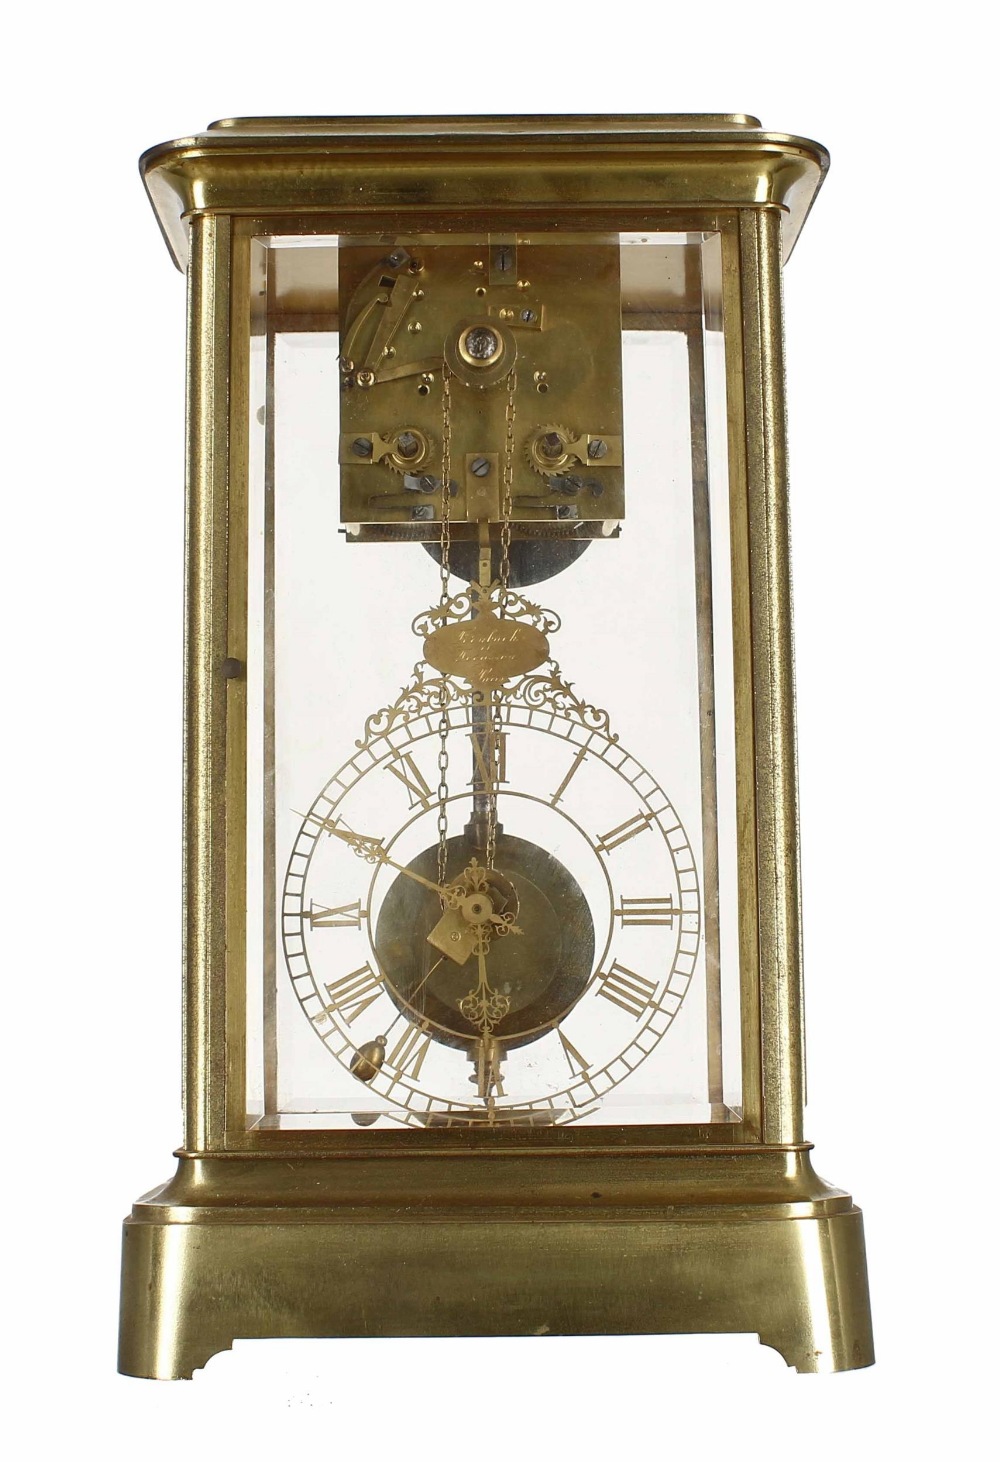 Rare and unusual brass four glass two train mantel clock, the movement housed to the top of the